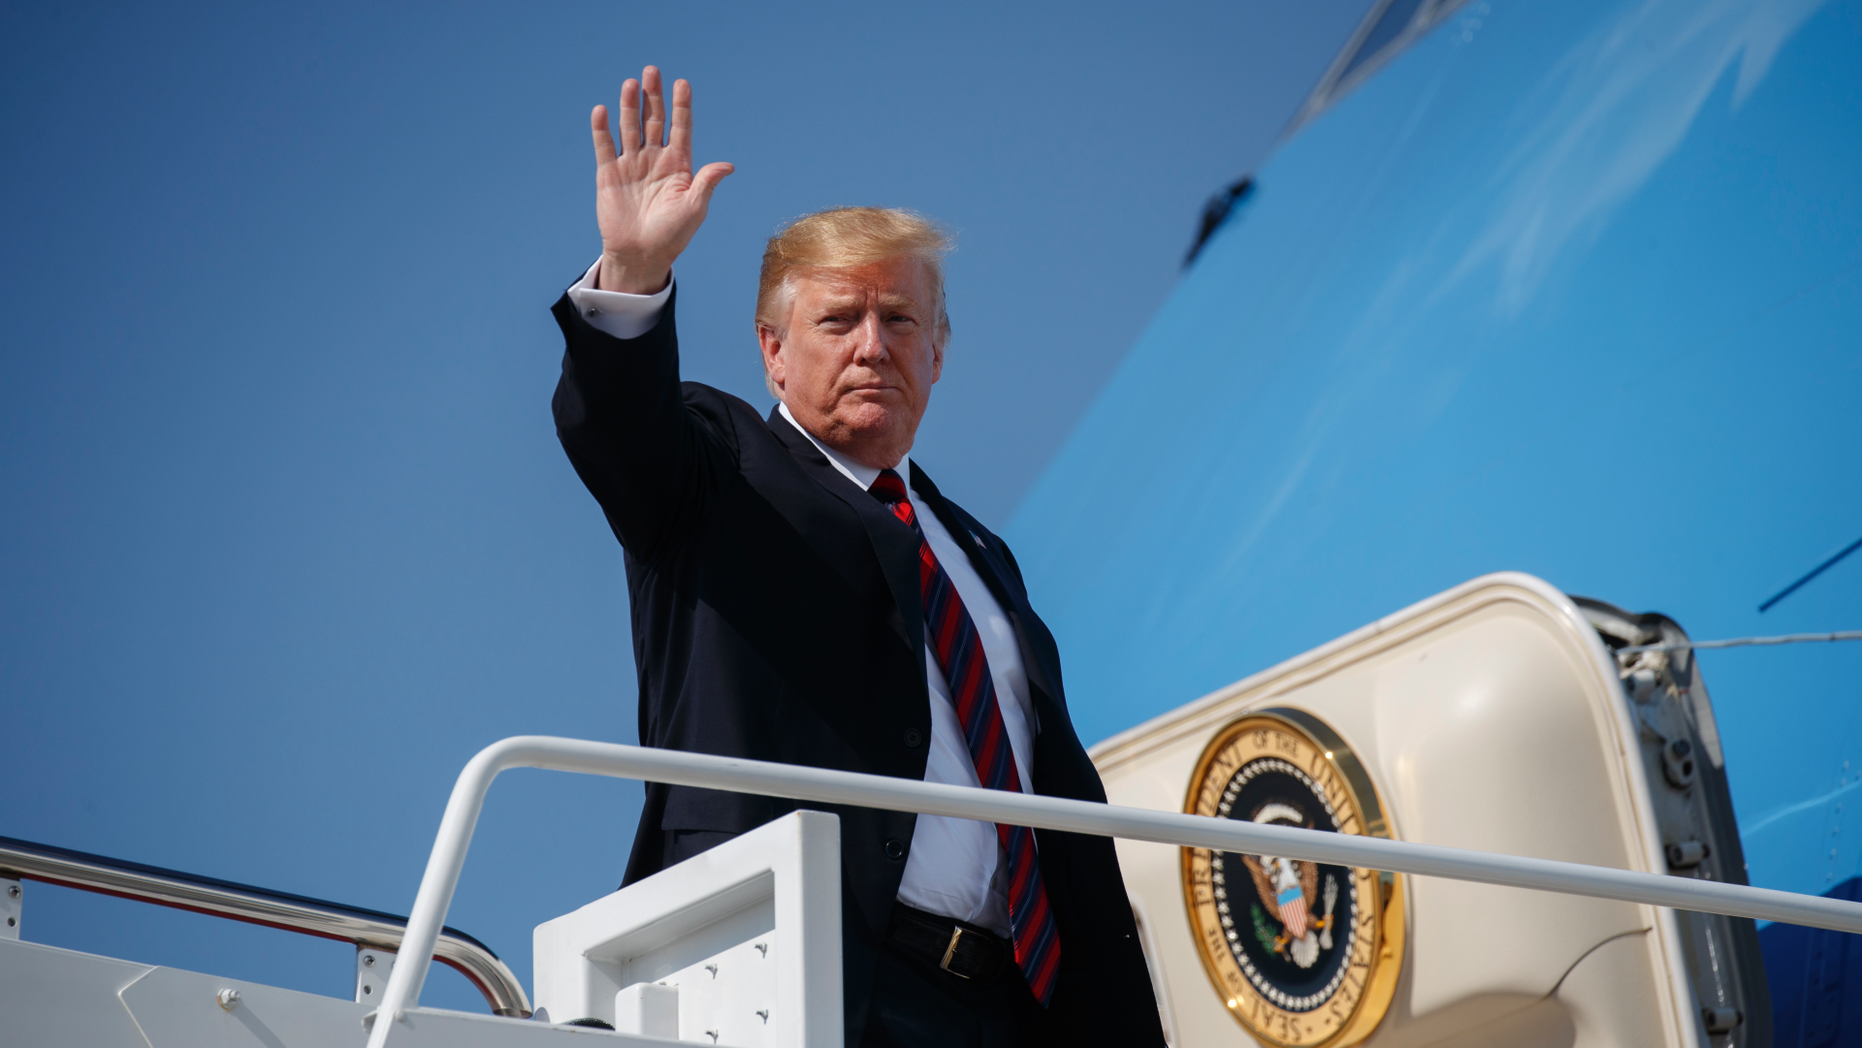 President Donald Trump waves as he boards Air Force One for a trip to New York to attend a fundraiser, Thursday, May 16, 2019, at Andrews Air Force Base, Md. (AP Photo/Evan Vucci)